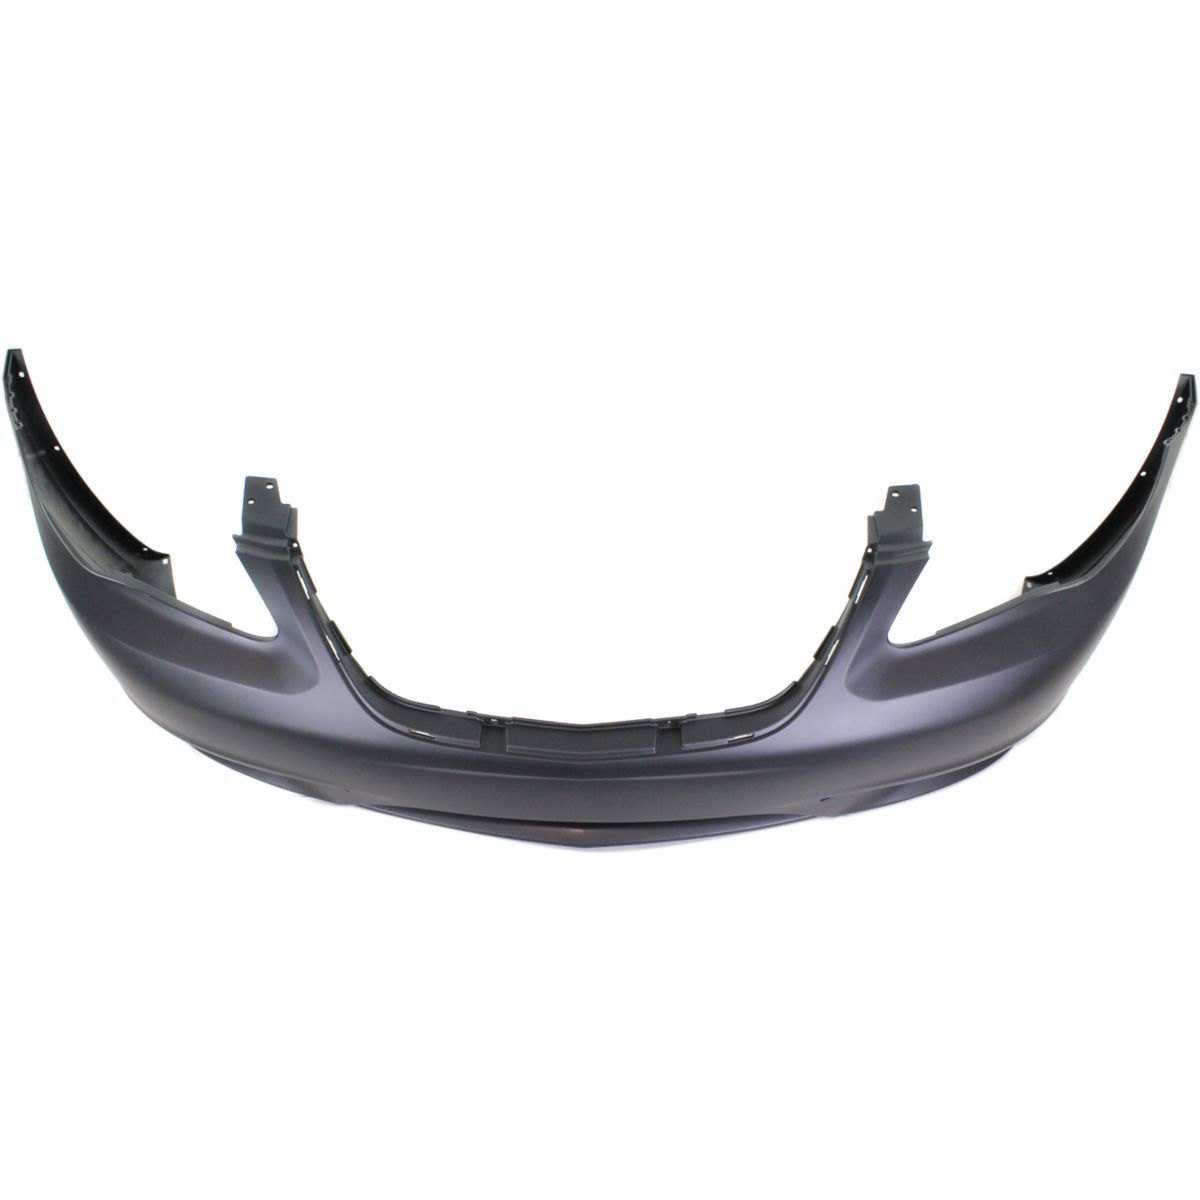 2011-2014 CHRYSLER 200 Front Bumper Cover Sedan Painted to Match